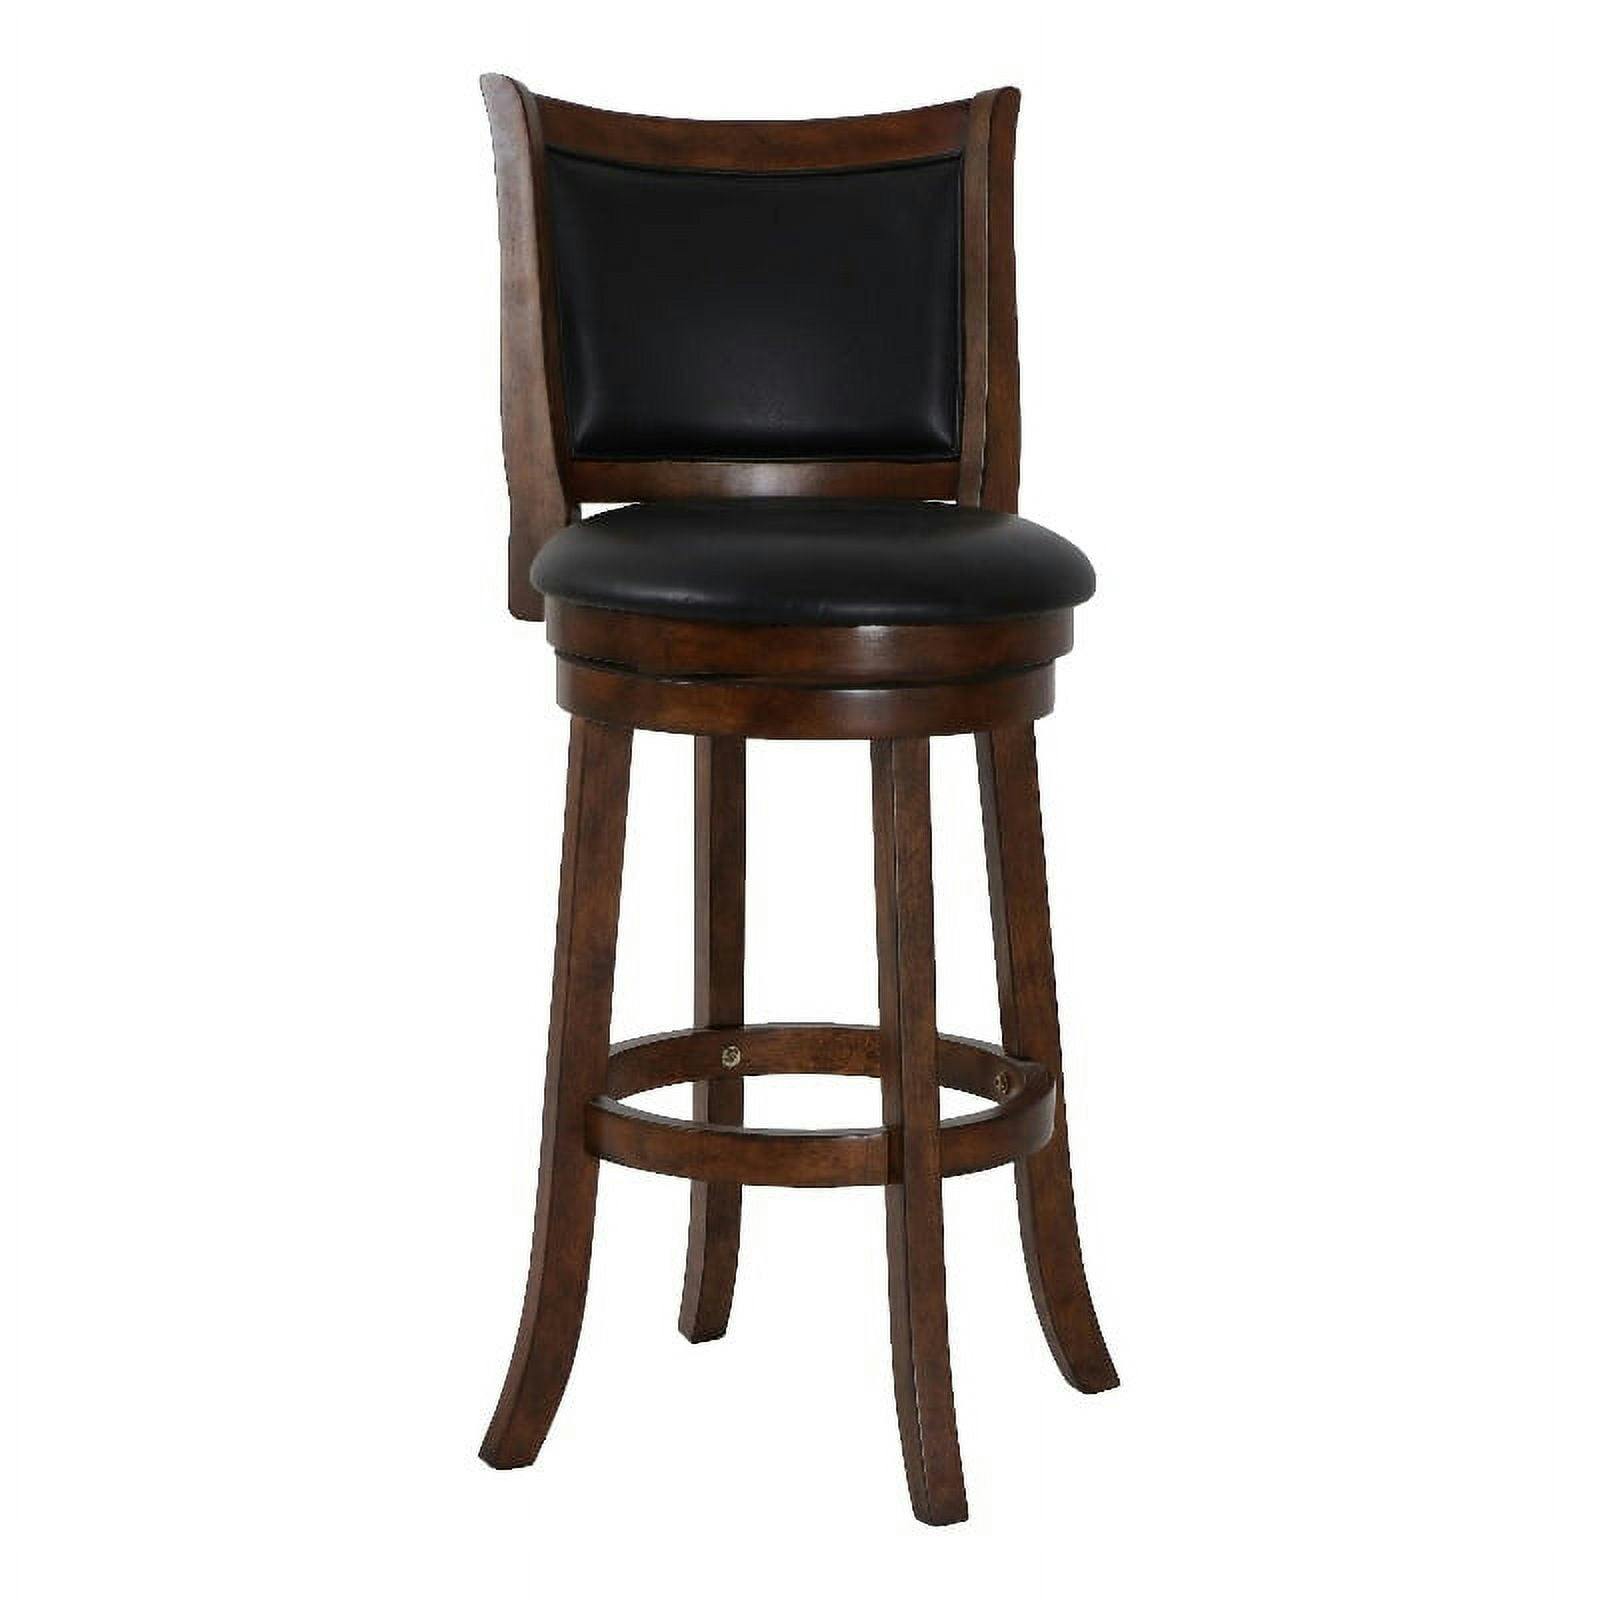 Traditional Bristol 29" Swivel Bar Stool in Black/Brown Leather and Wood